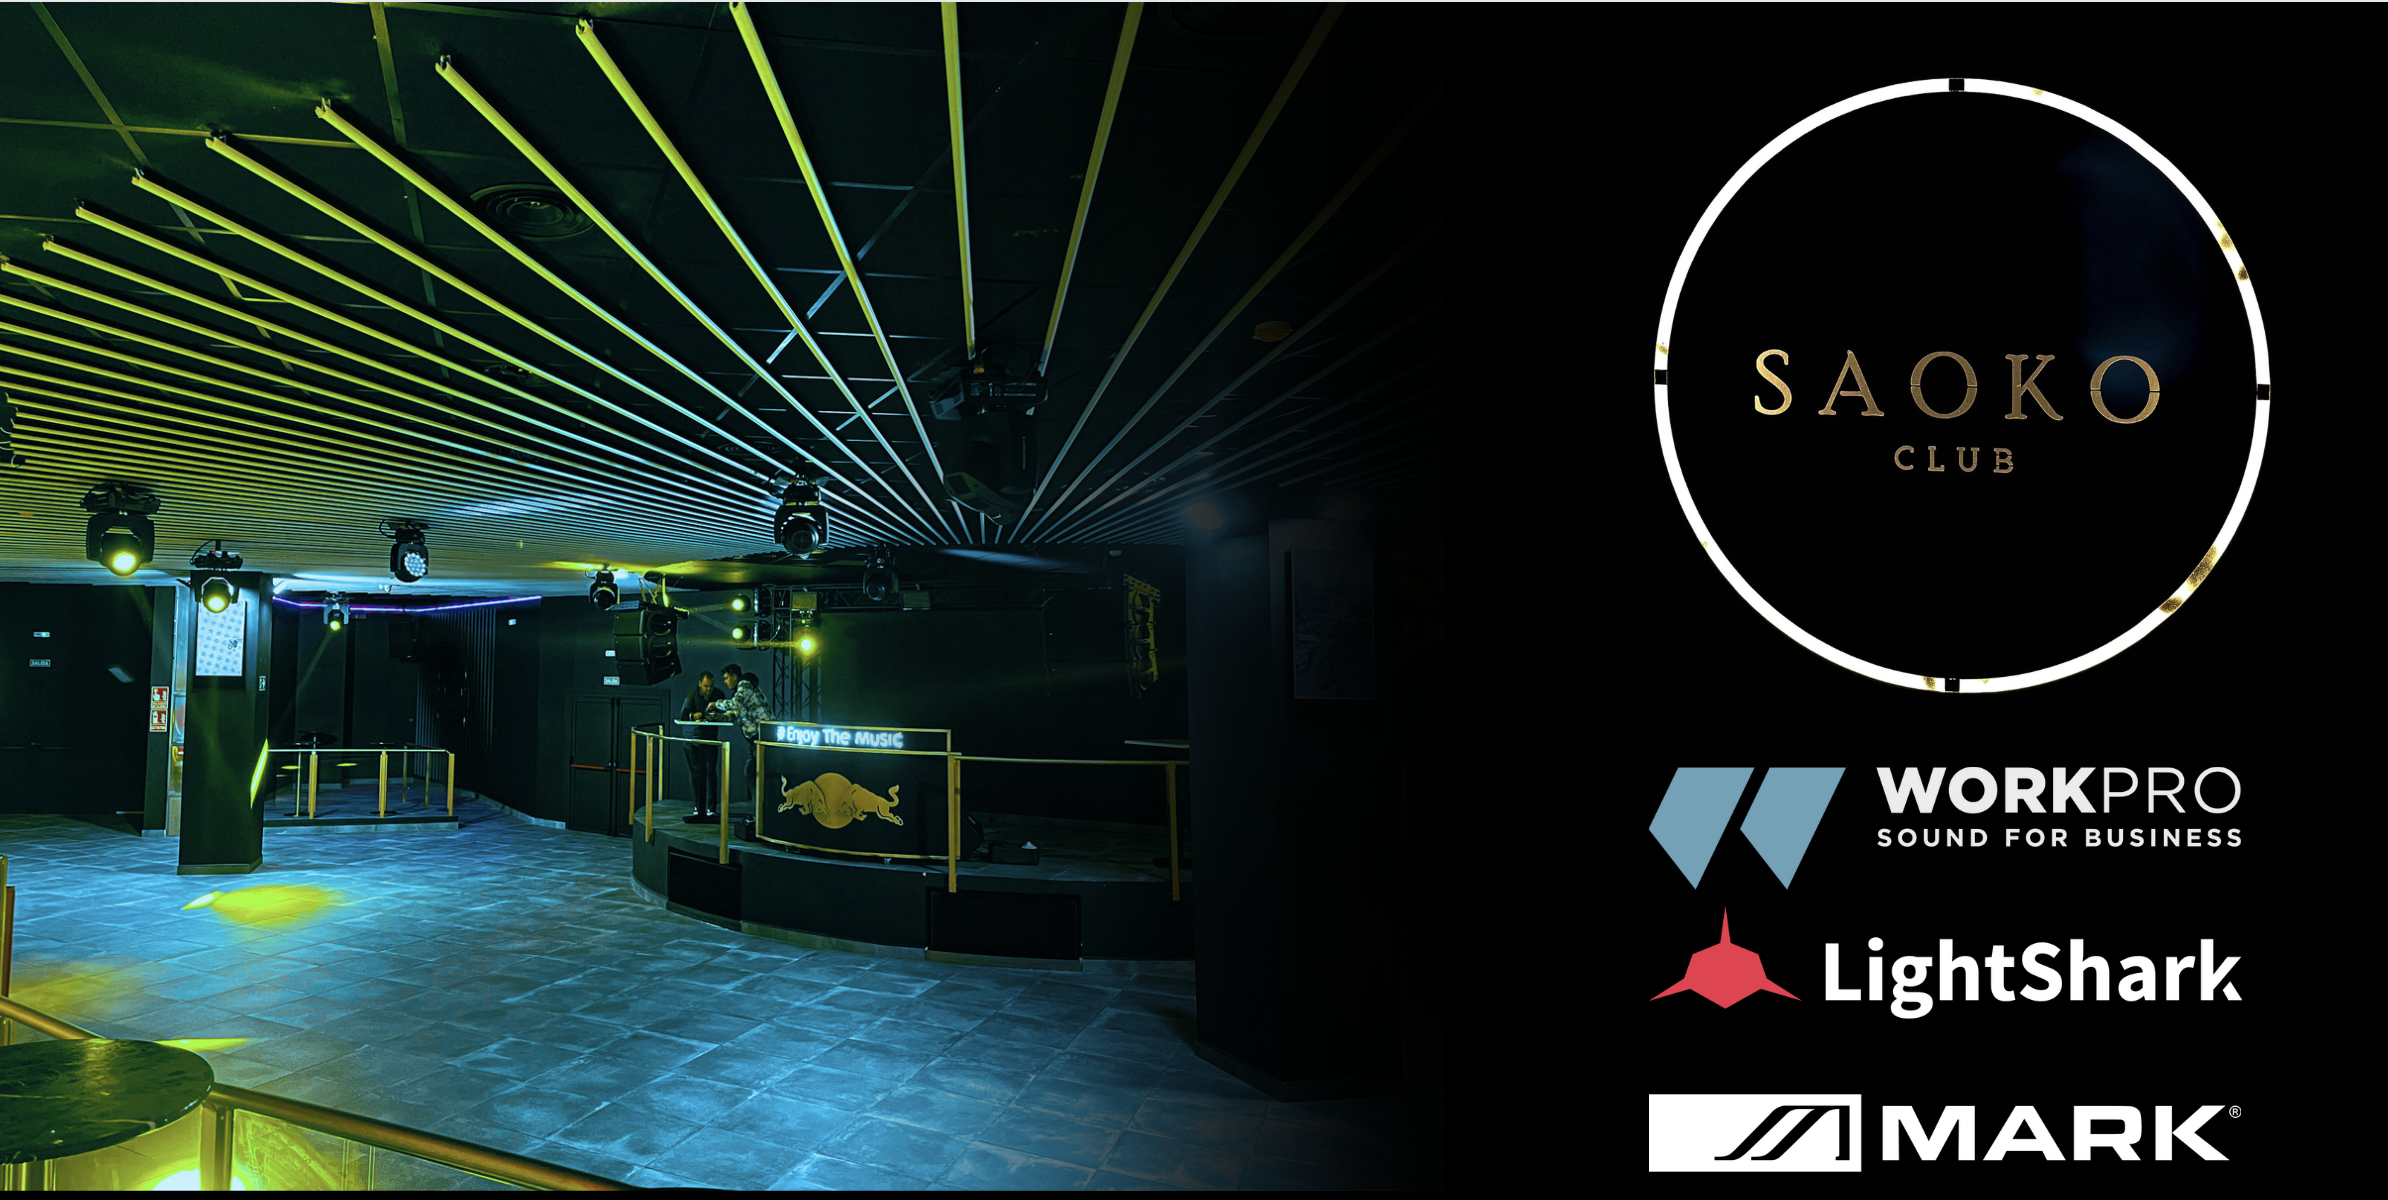 The new SAOKO Night Club is committed to WorkPro, Mark, and LightShark.